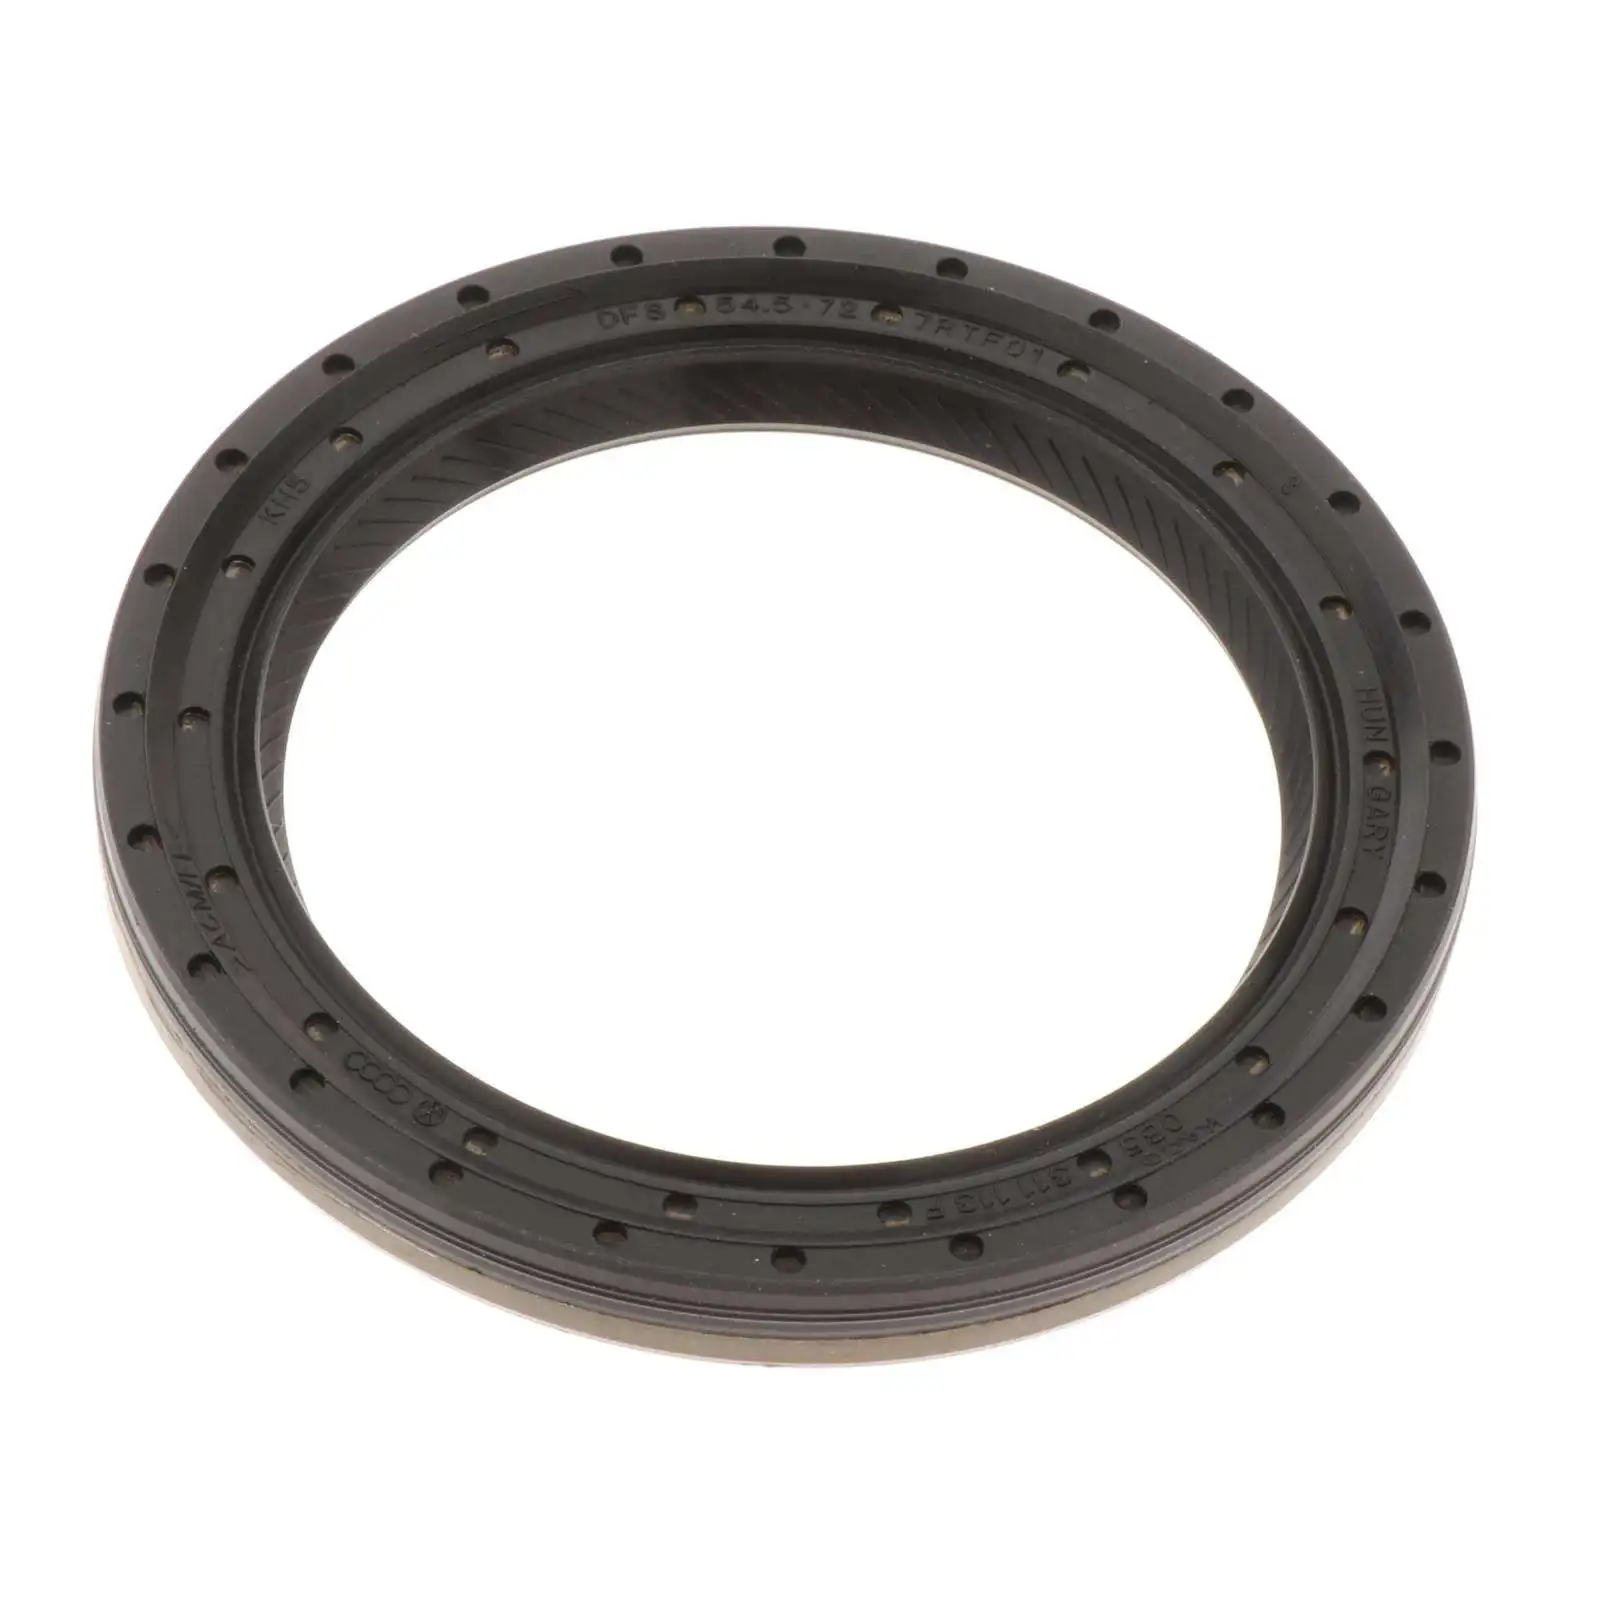 

0B5 DL501 Transmission Front Oil Seal Shaft Oil Seal Fits for Audi Q5 A4 RS6 7 SP DSG DCT 0B5311113F Accessories